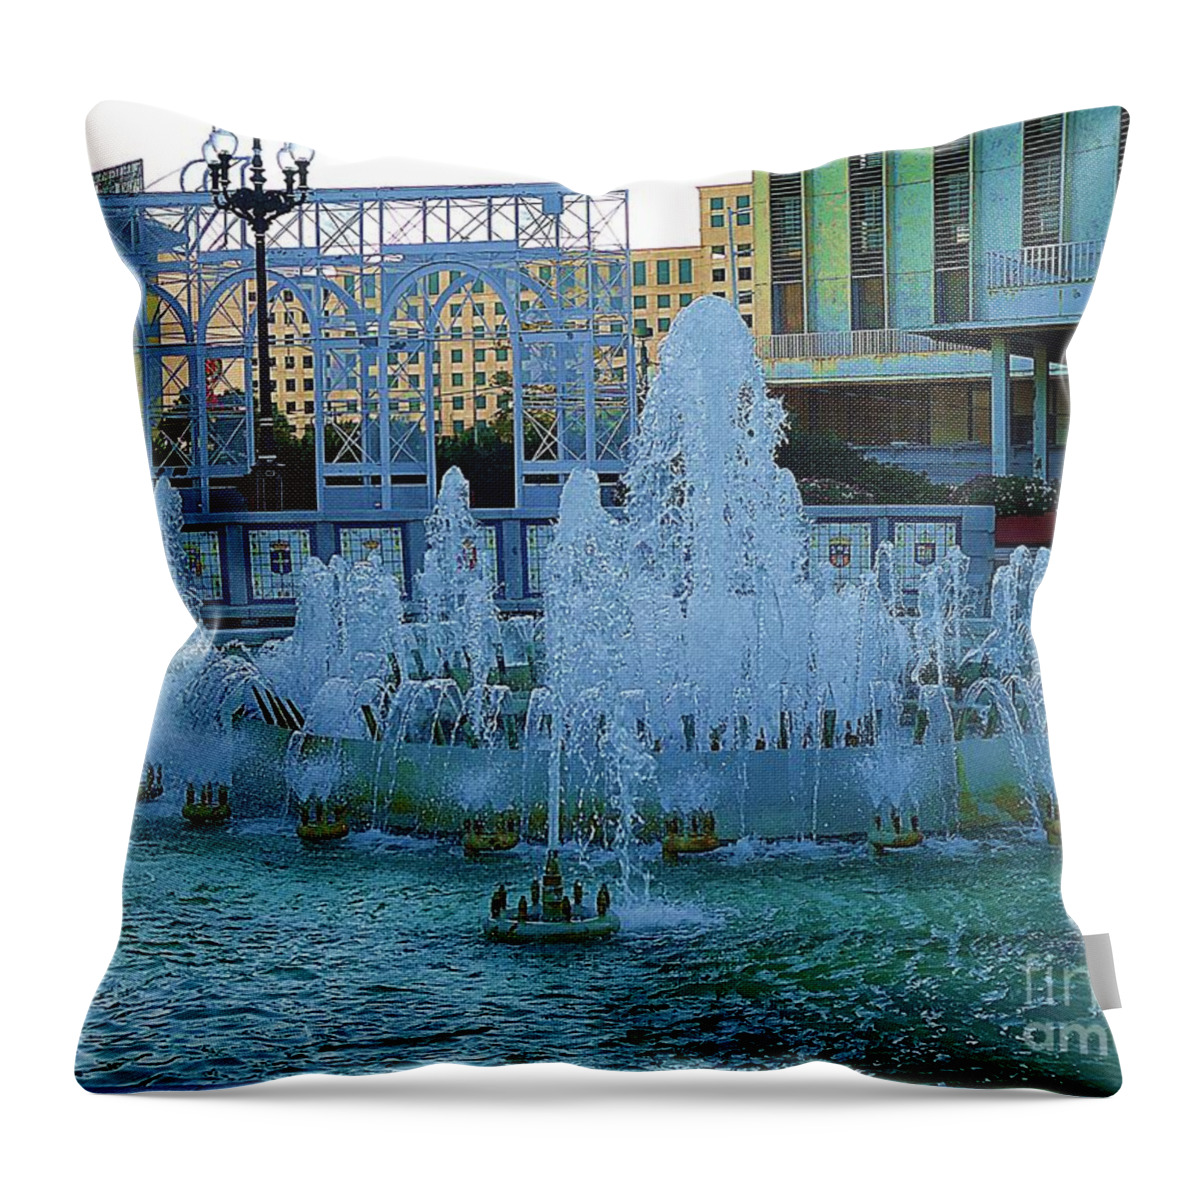 French Quarter Fountain Throw Pillow featuring the photograph French Quarter Water Fountain by Saundra Myles